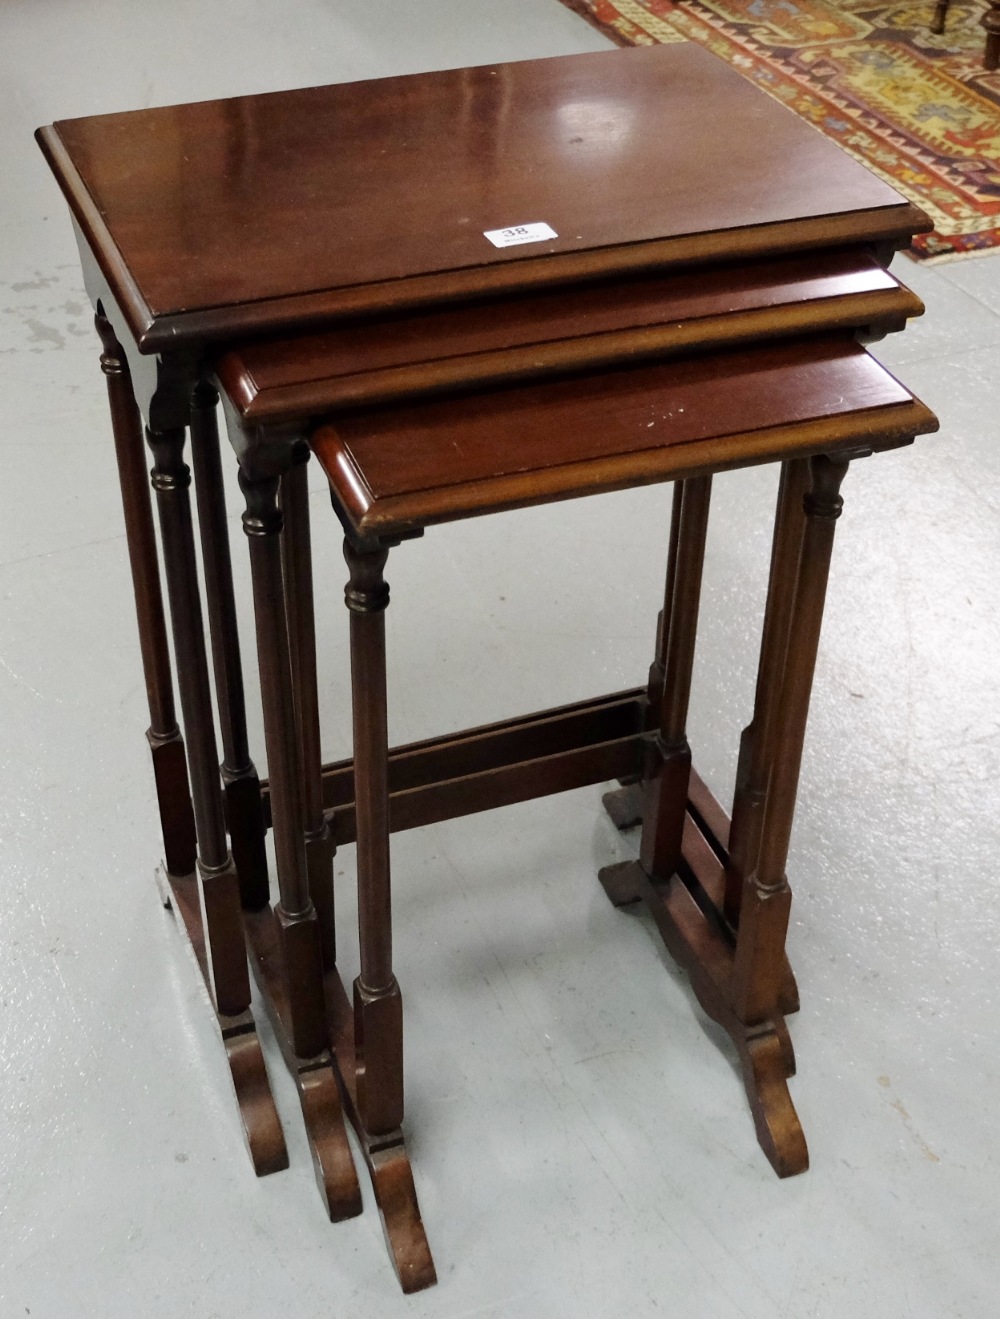 Nest of 3 mahogany Tables, in spindle legs (19” widest)